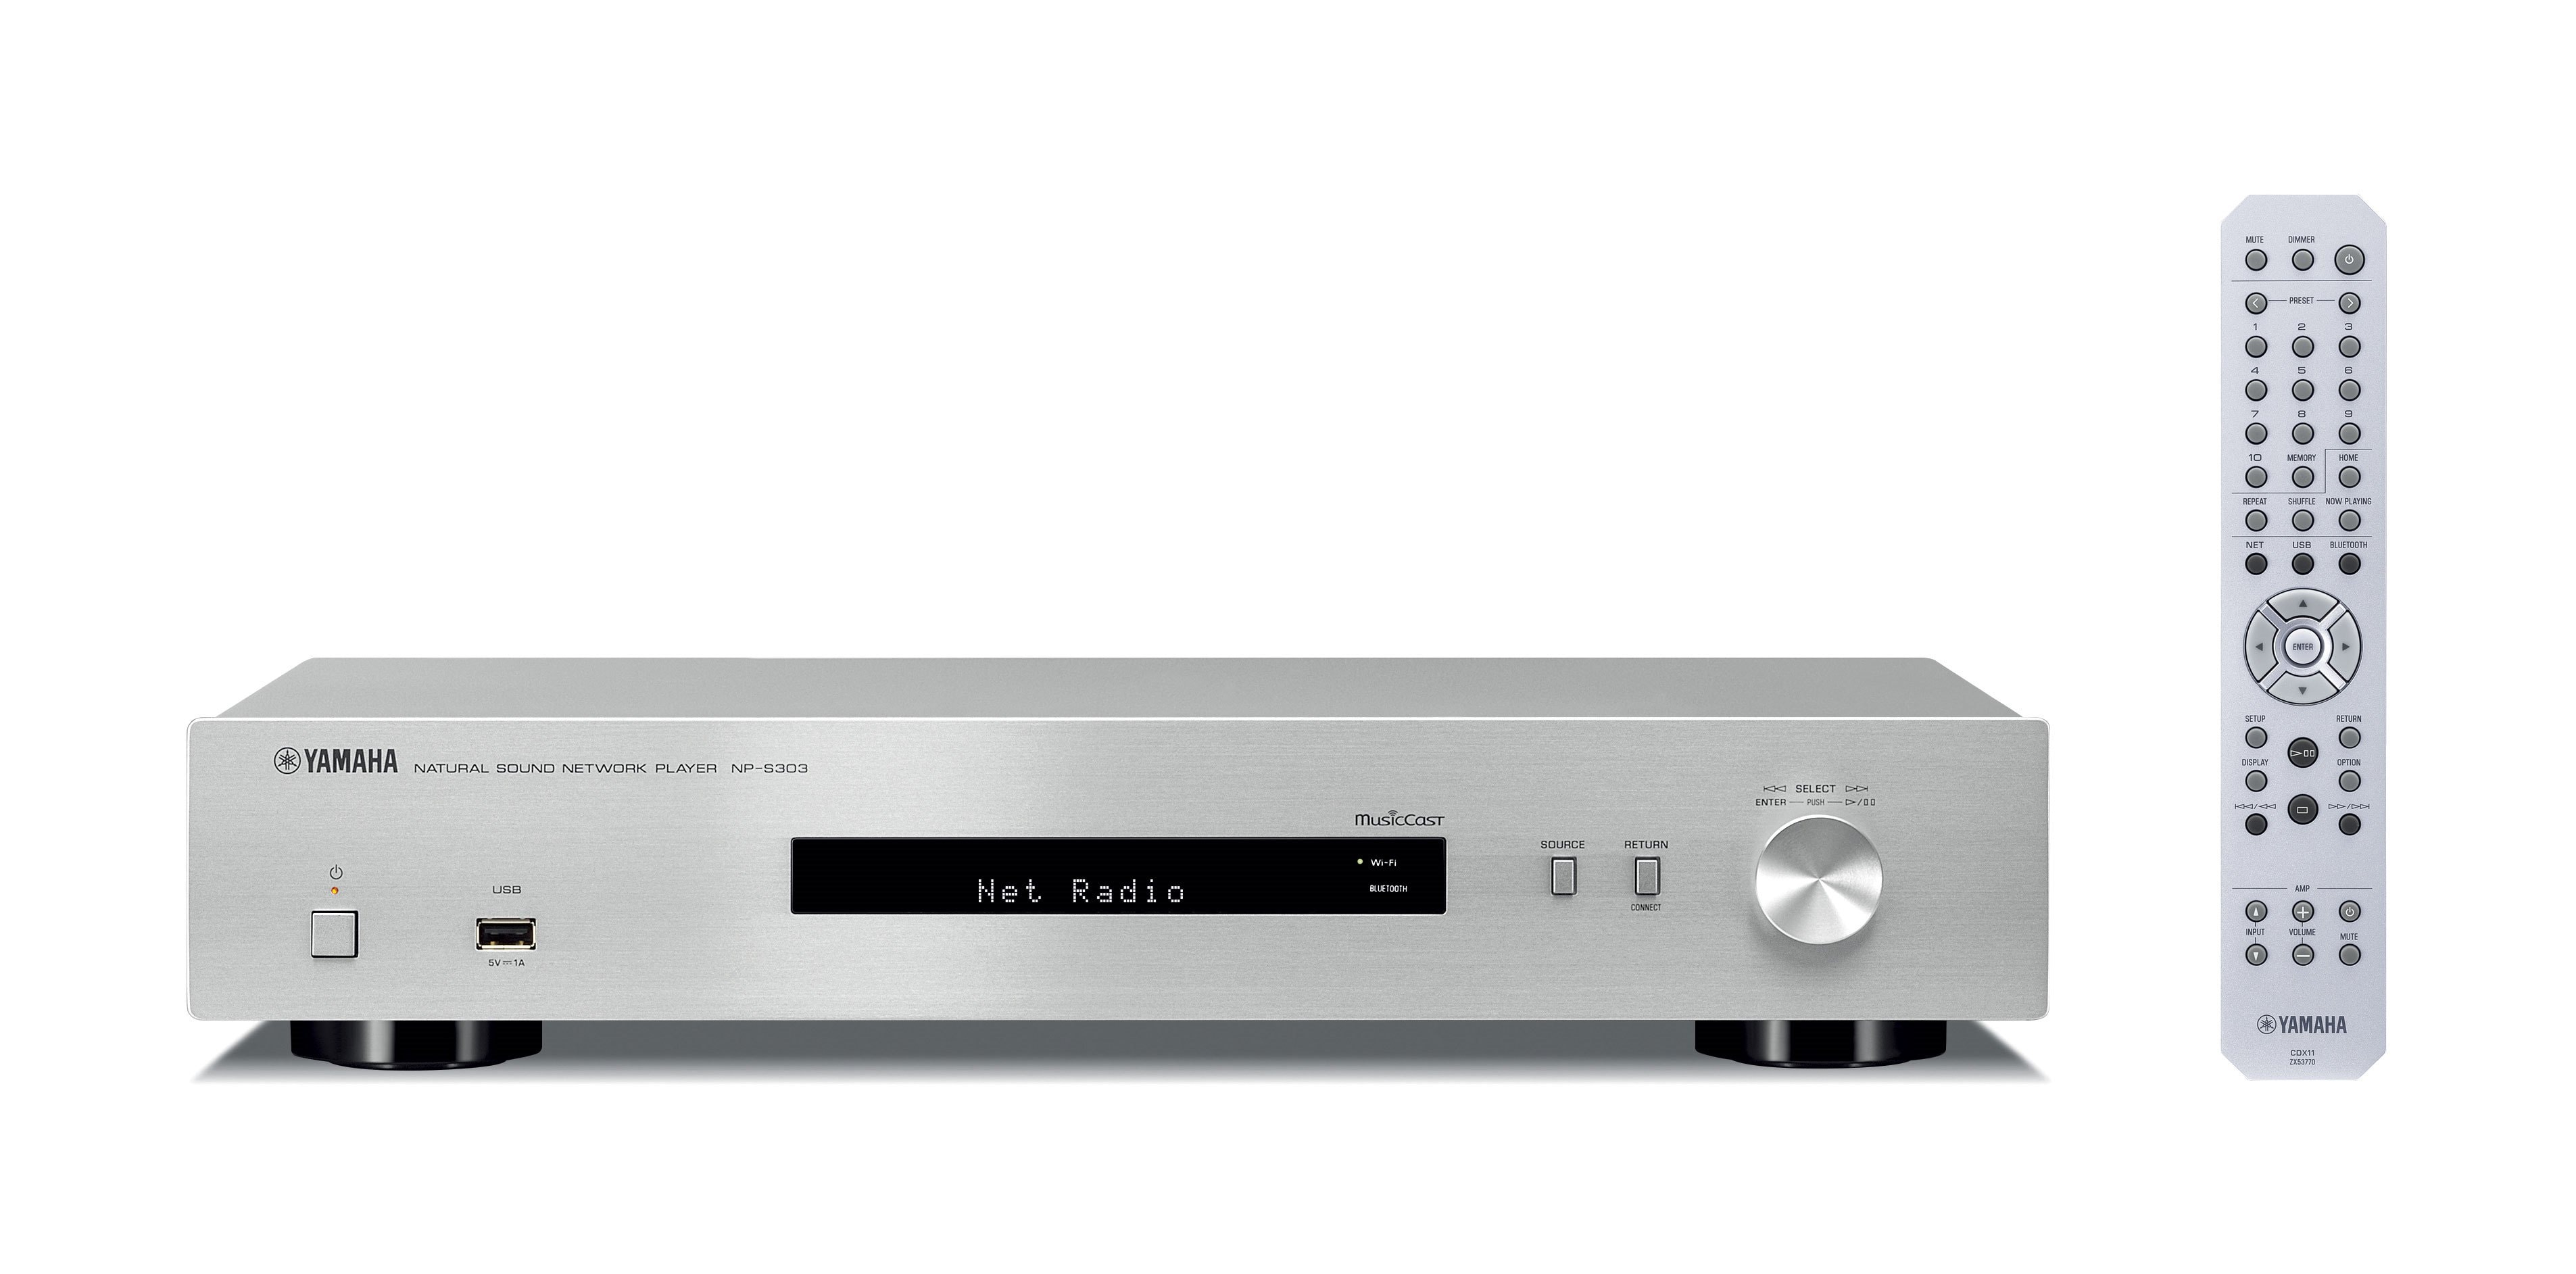 MusicCast NP-S303 - Overview - HiFi Components - Audio & Visual 